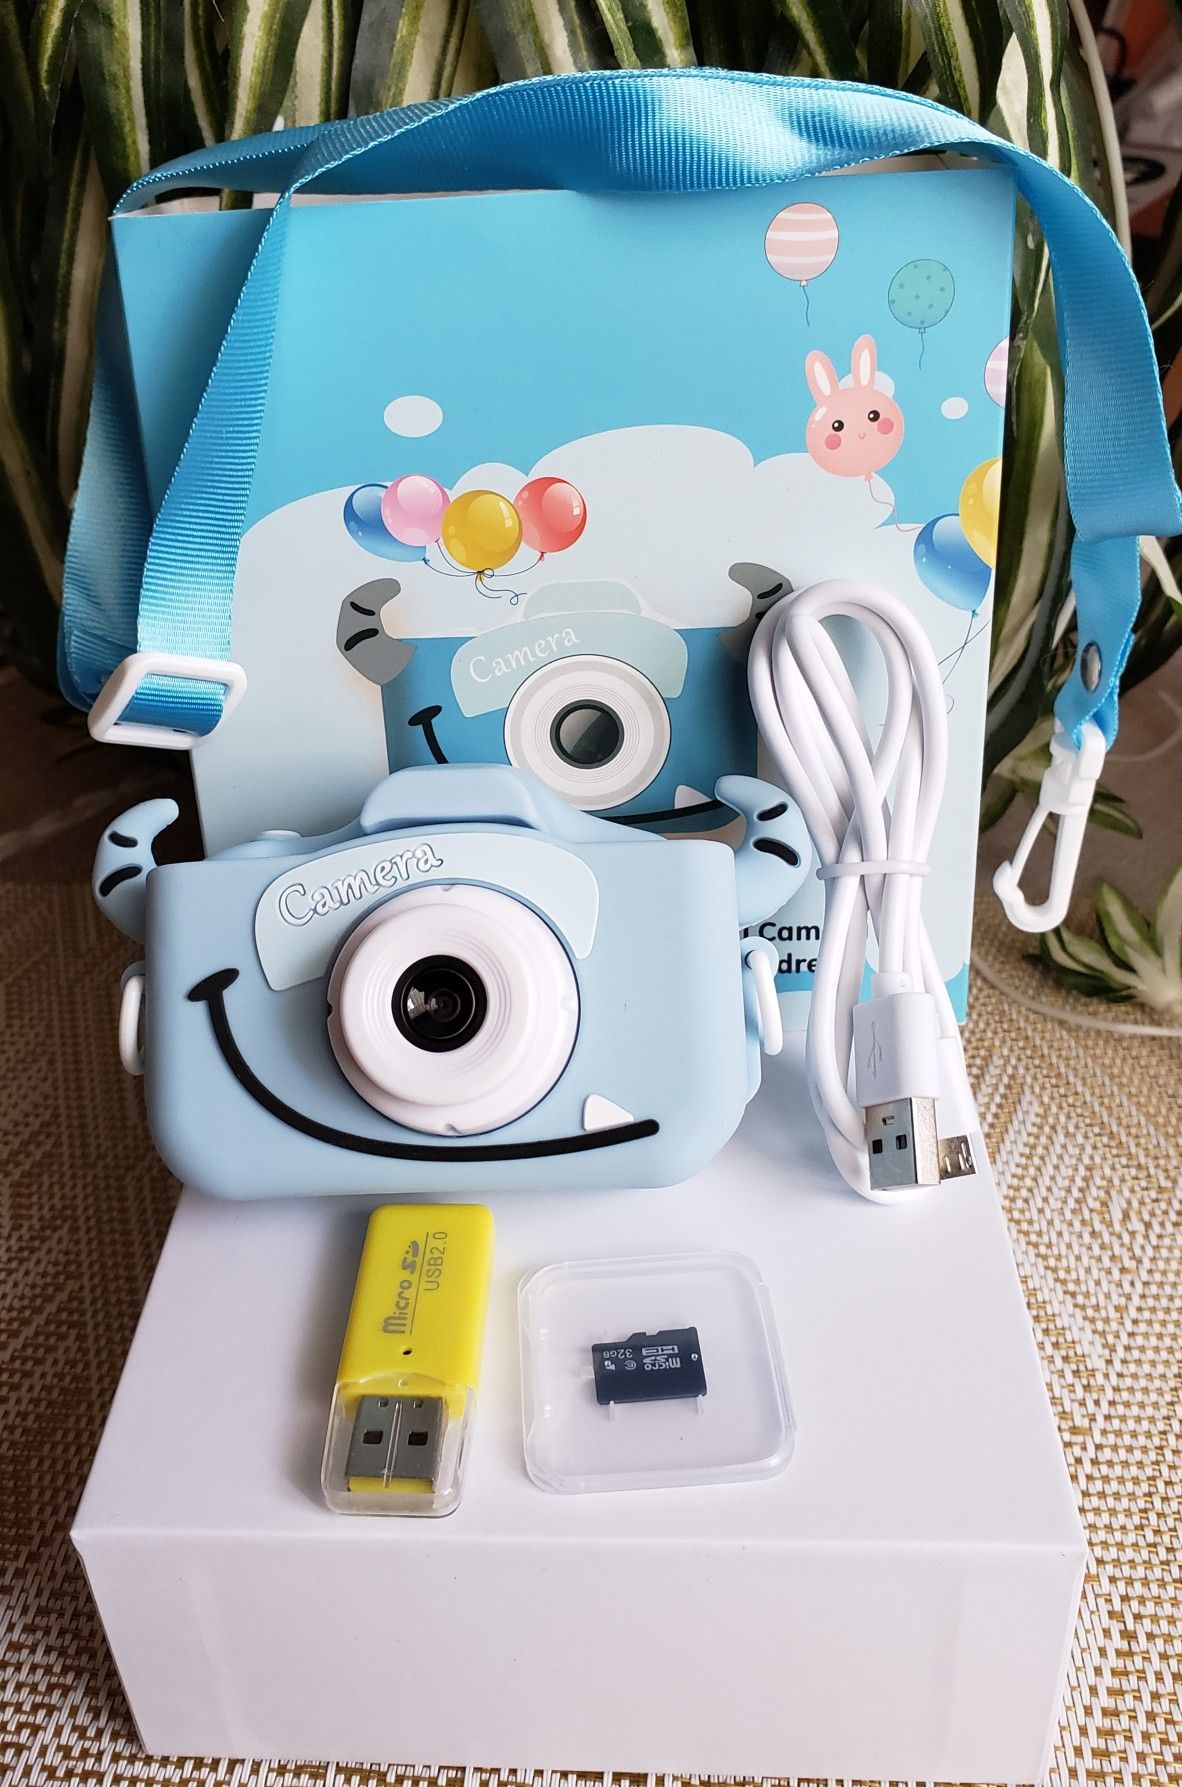 HD Child Digital Video Rechargeable Cameras Toys with Soft Silicone..